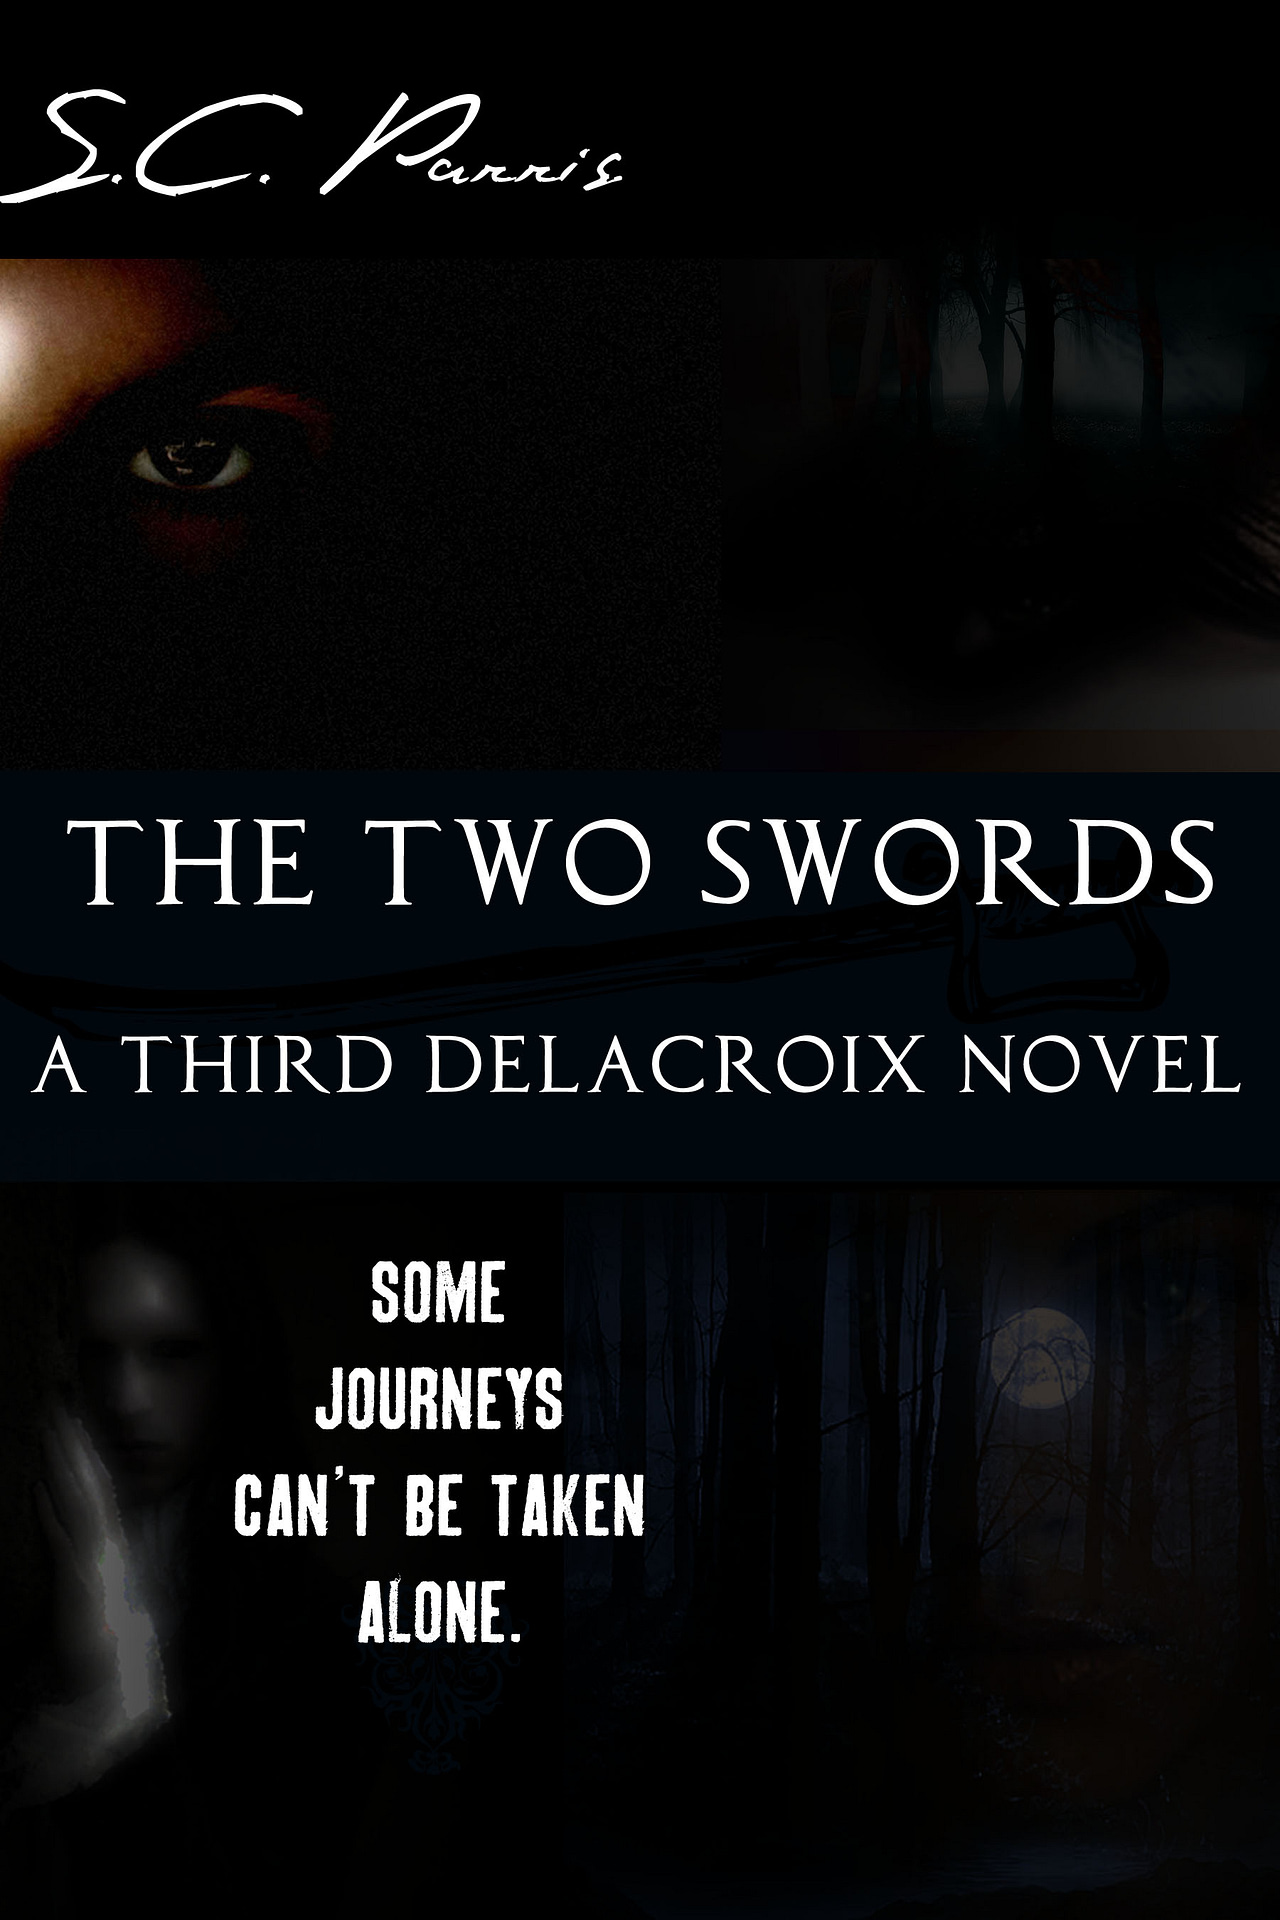 book, novel, the two swords